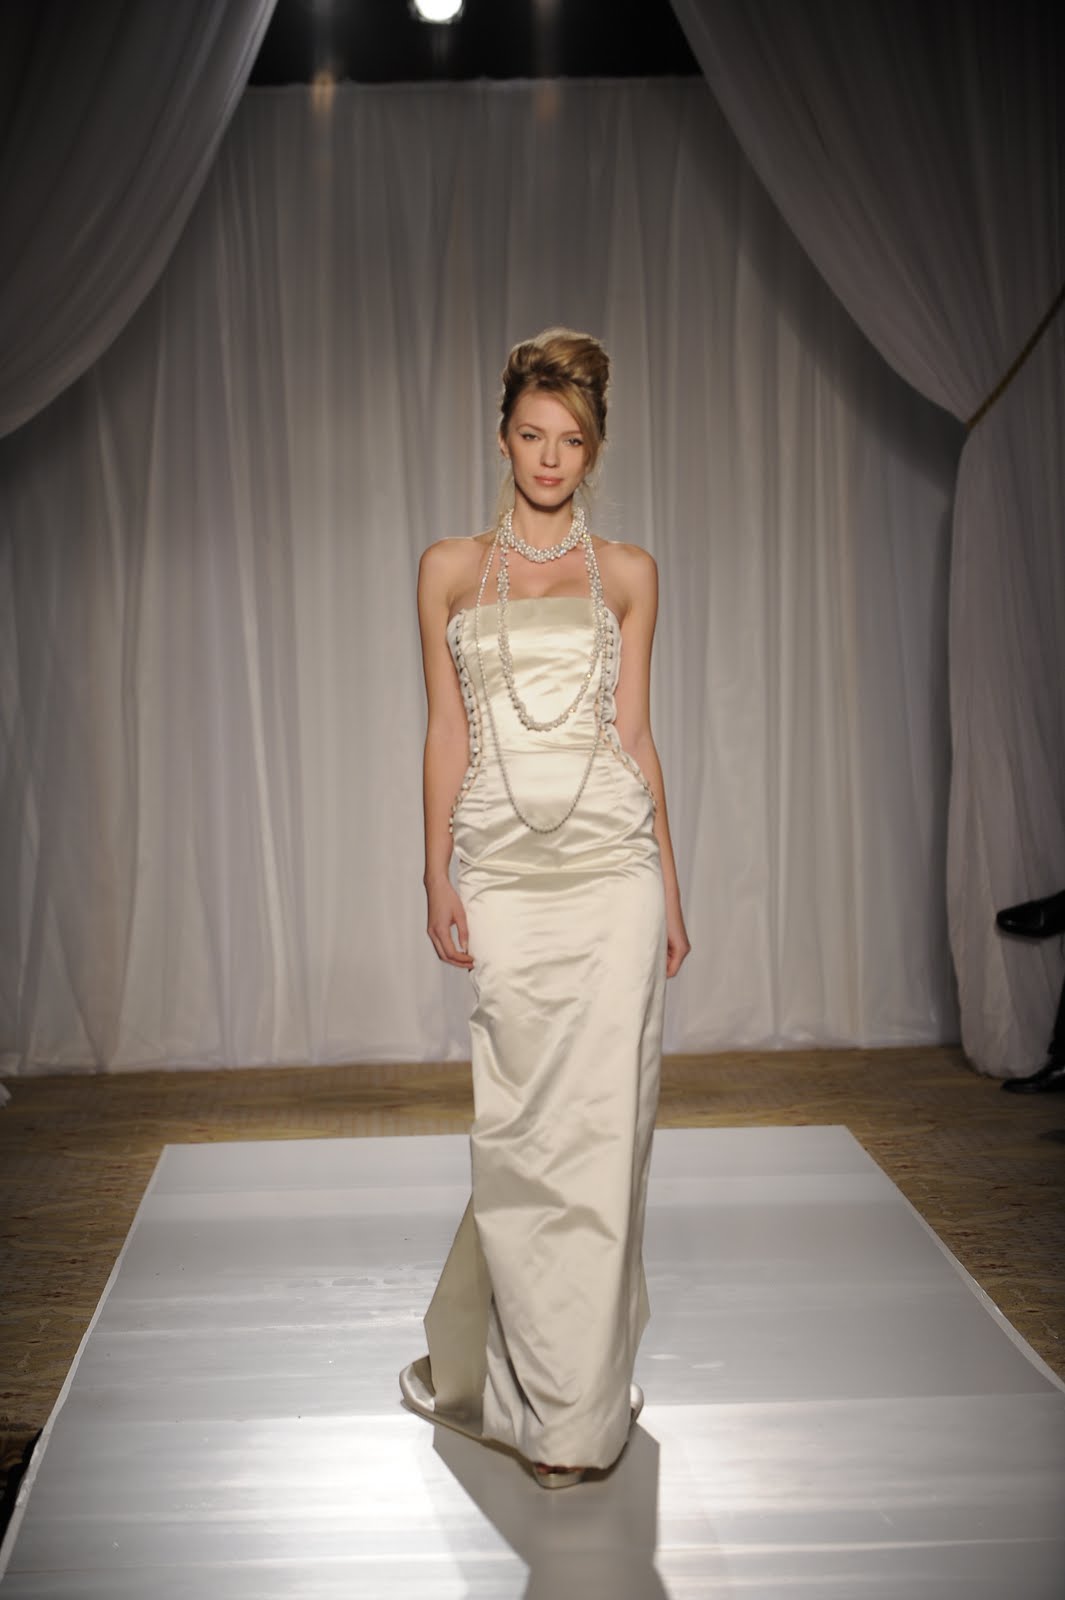 THE DOUGLAS HANNANT FALL 2010 BRIDAL COLLECTION – “NUANCE